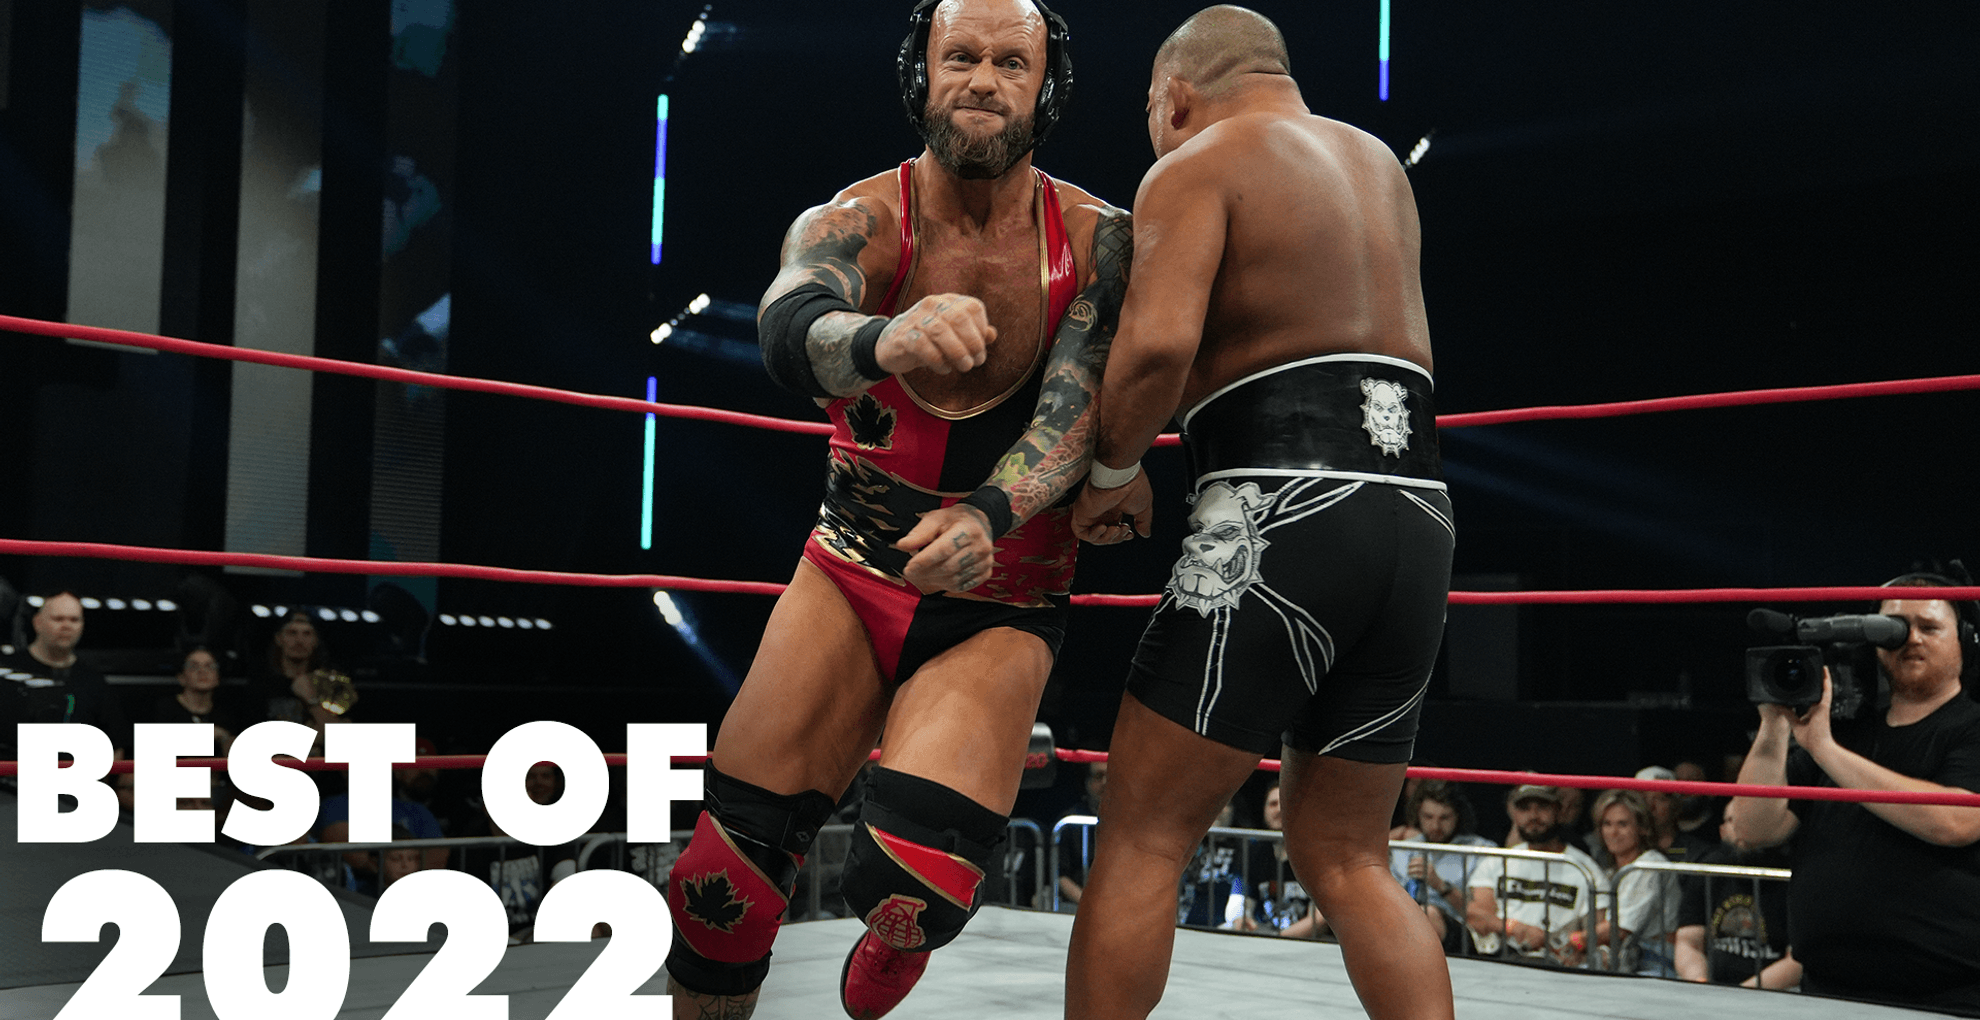 Relive the Greatest Matches of 2022 So Far in This MASSIVE Playlist Available Now on IMPACT Plus